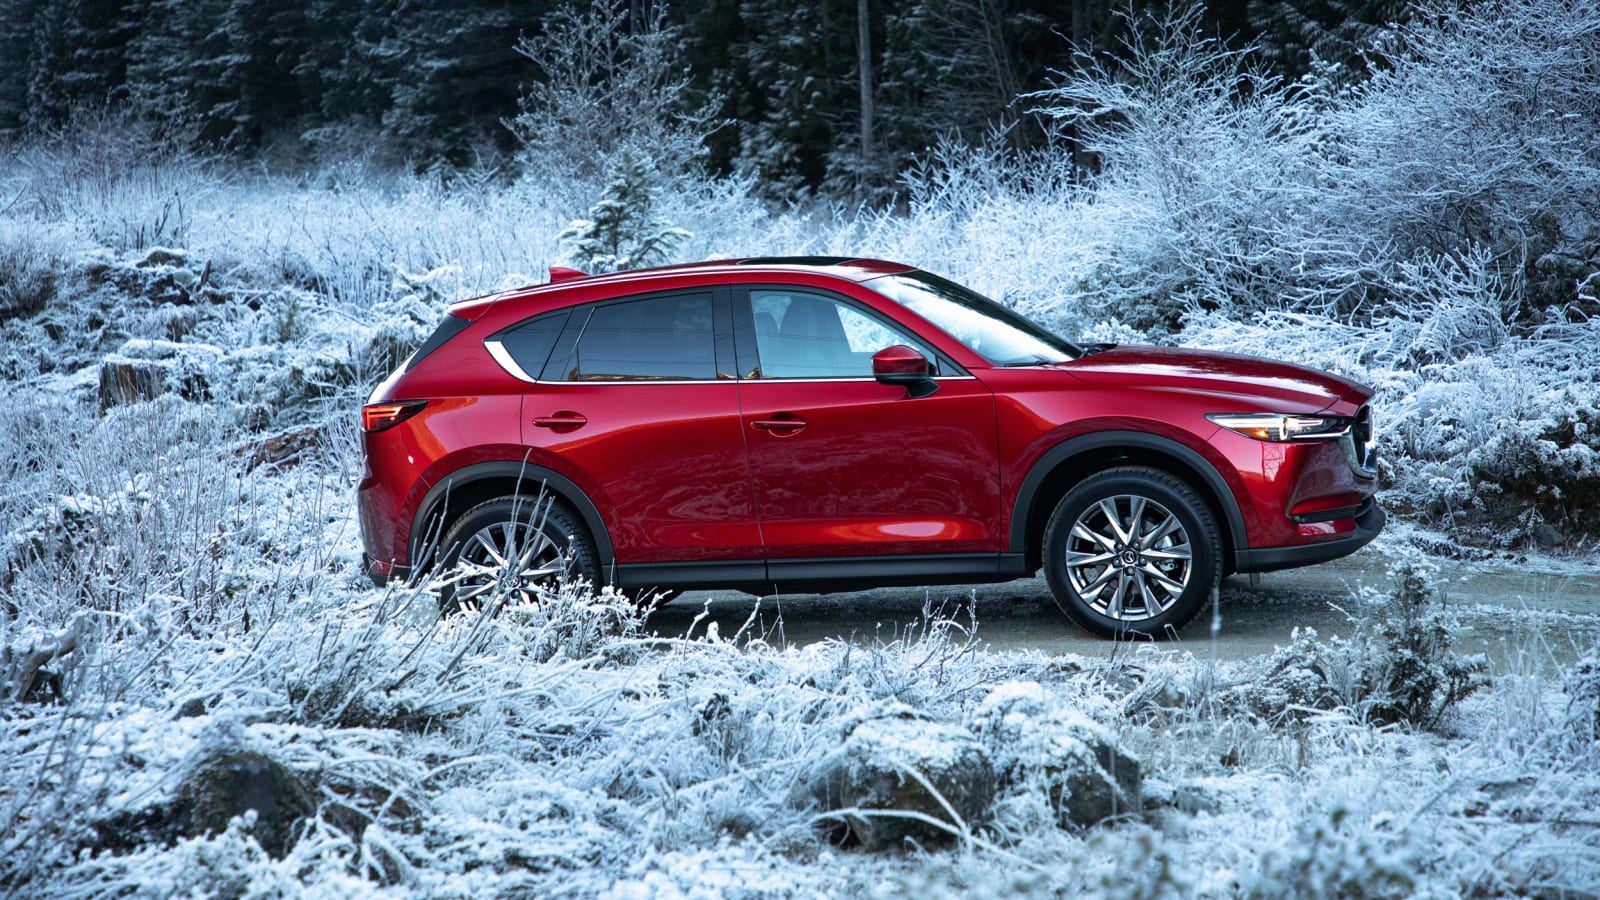 2019 Mazda CX-5 Reviews | Price, specs, features and photos - Autoblog